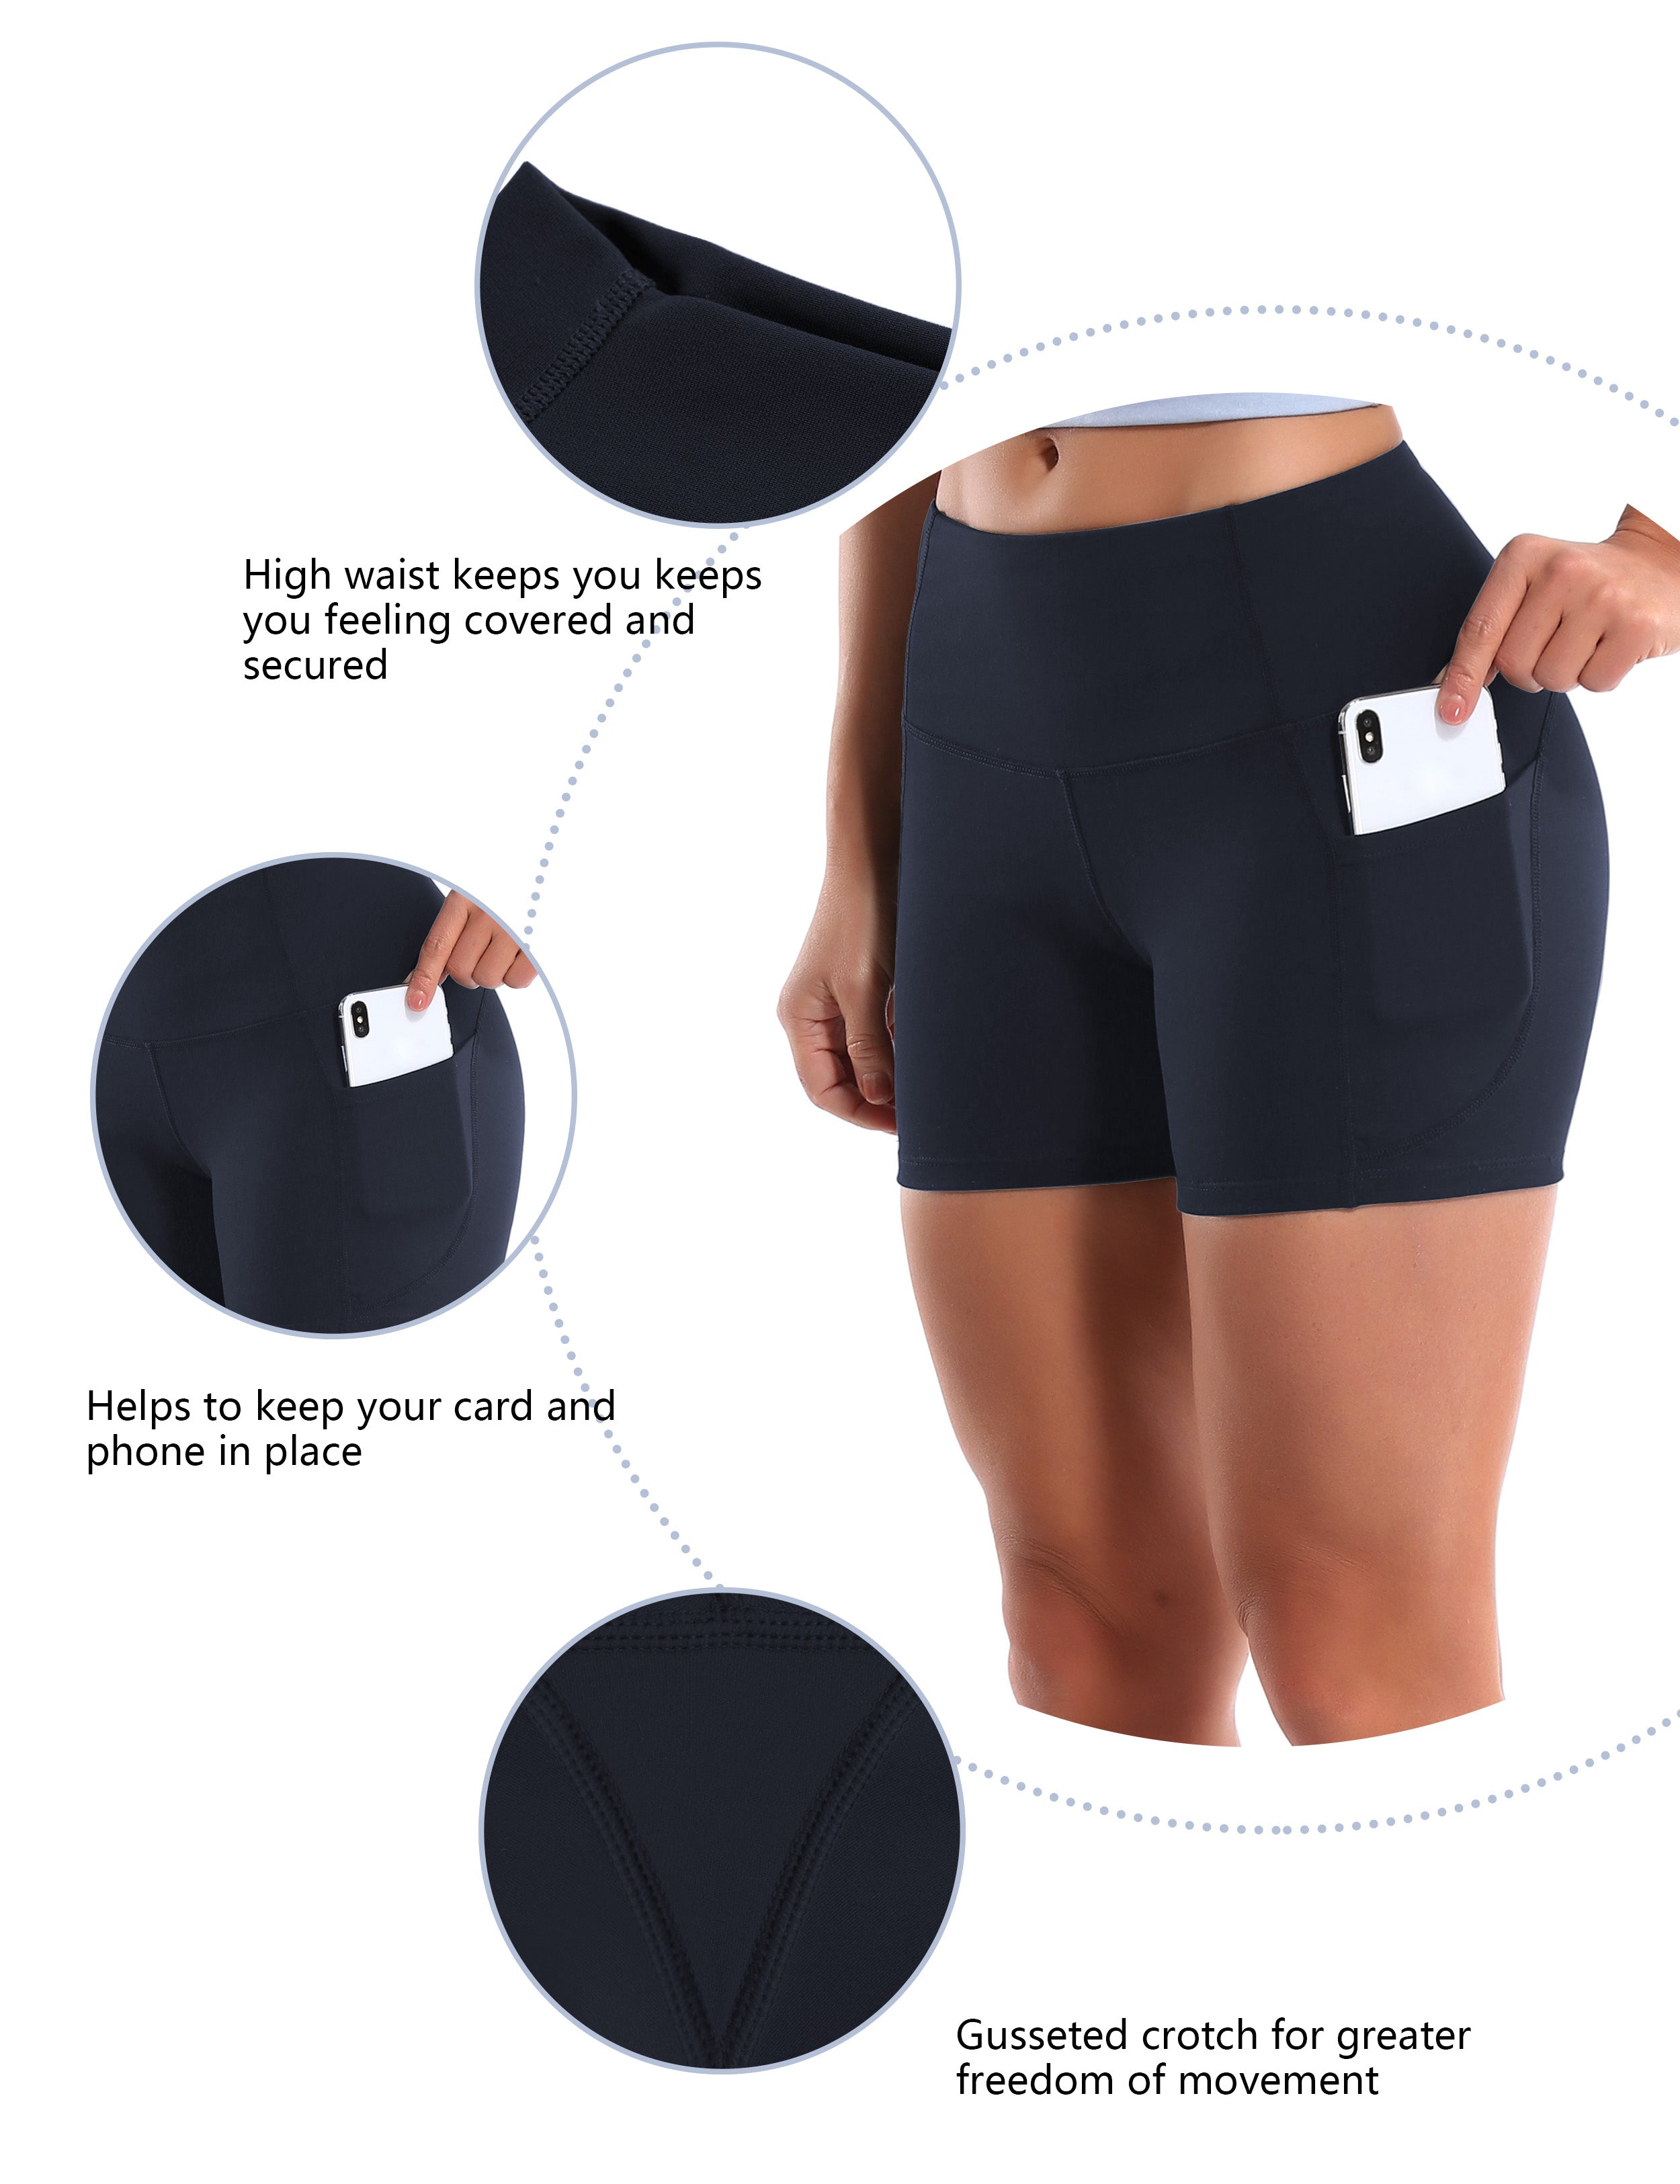 High Waist Side Pockets Yoga Shorts darkblue Softest-ever fabric High elasticity 4-way stretch Fabric doesn't attract lint easily No see-through Moisture-wicking Machine wash 88% Nylon, 12% Spandex